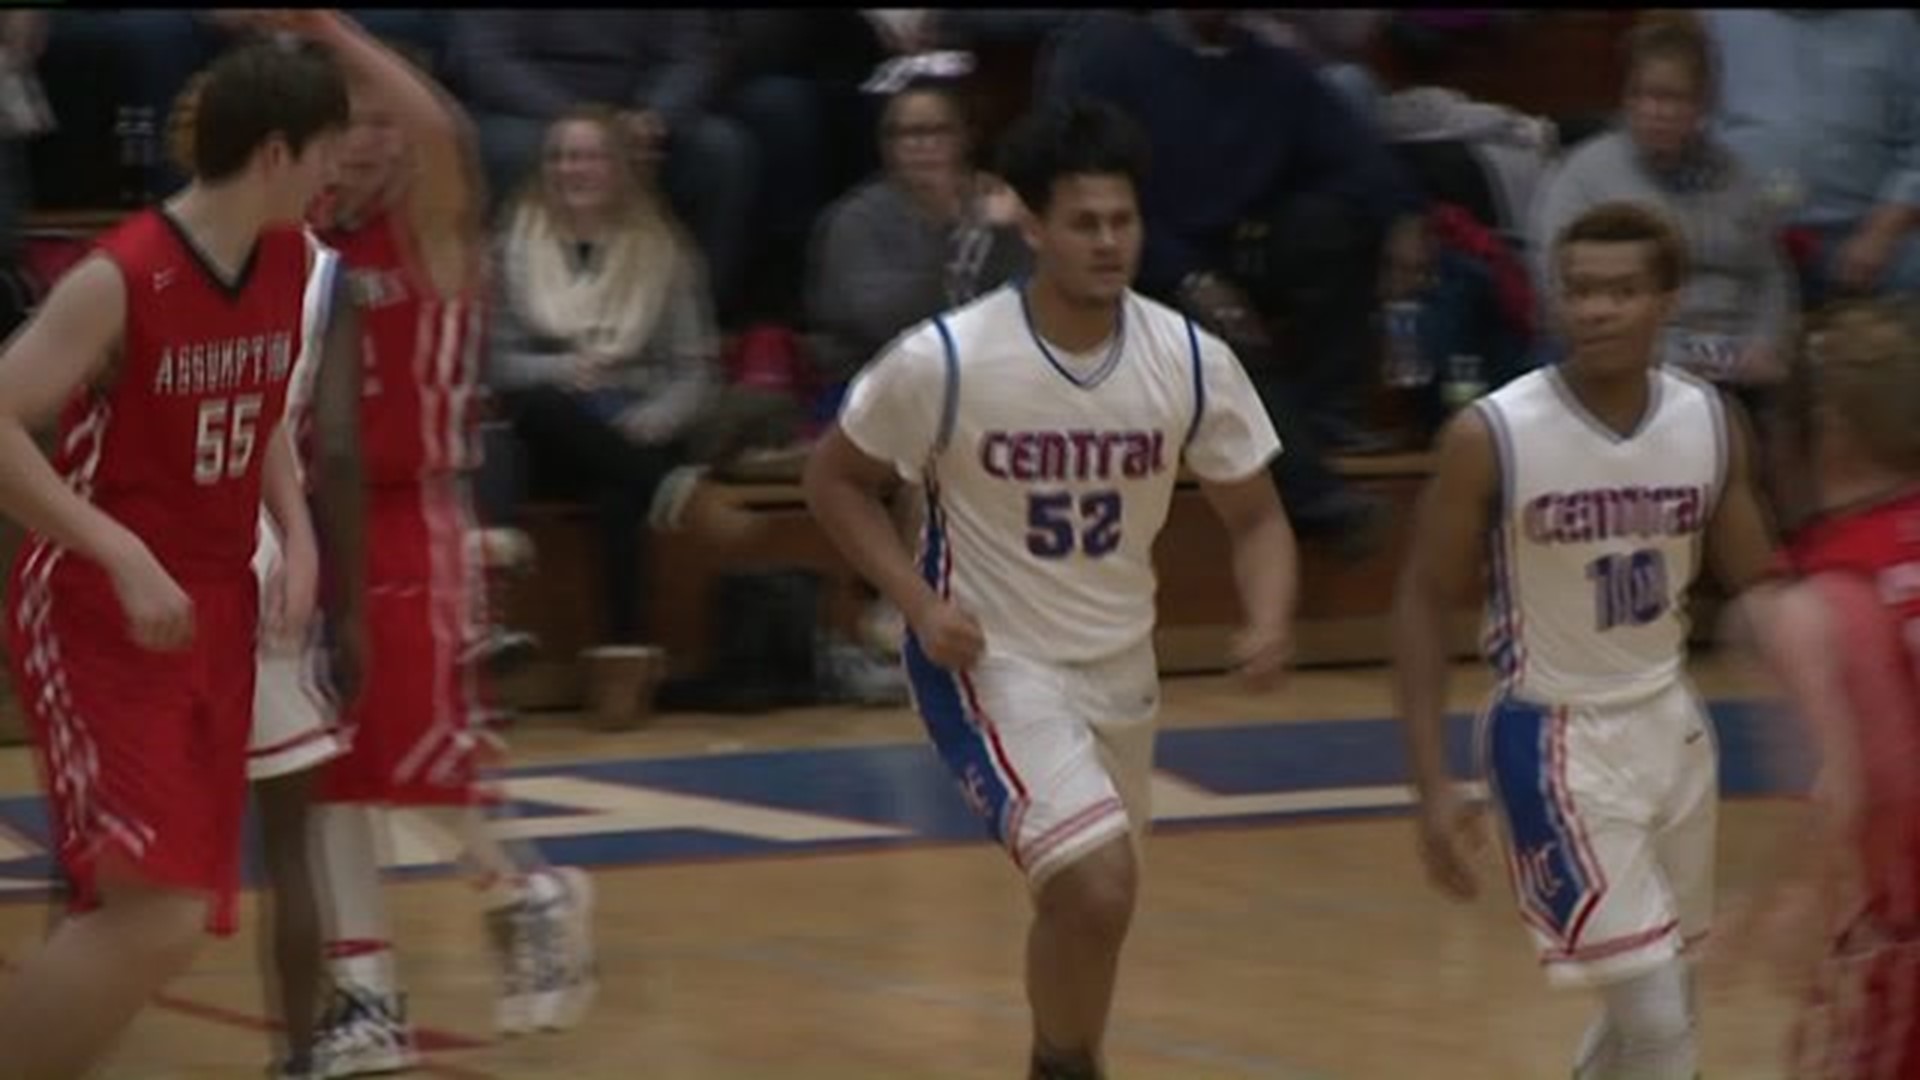 Central wins at home over Assumption